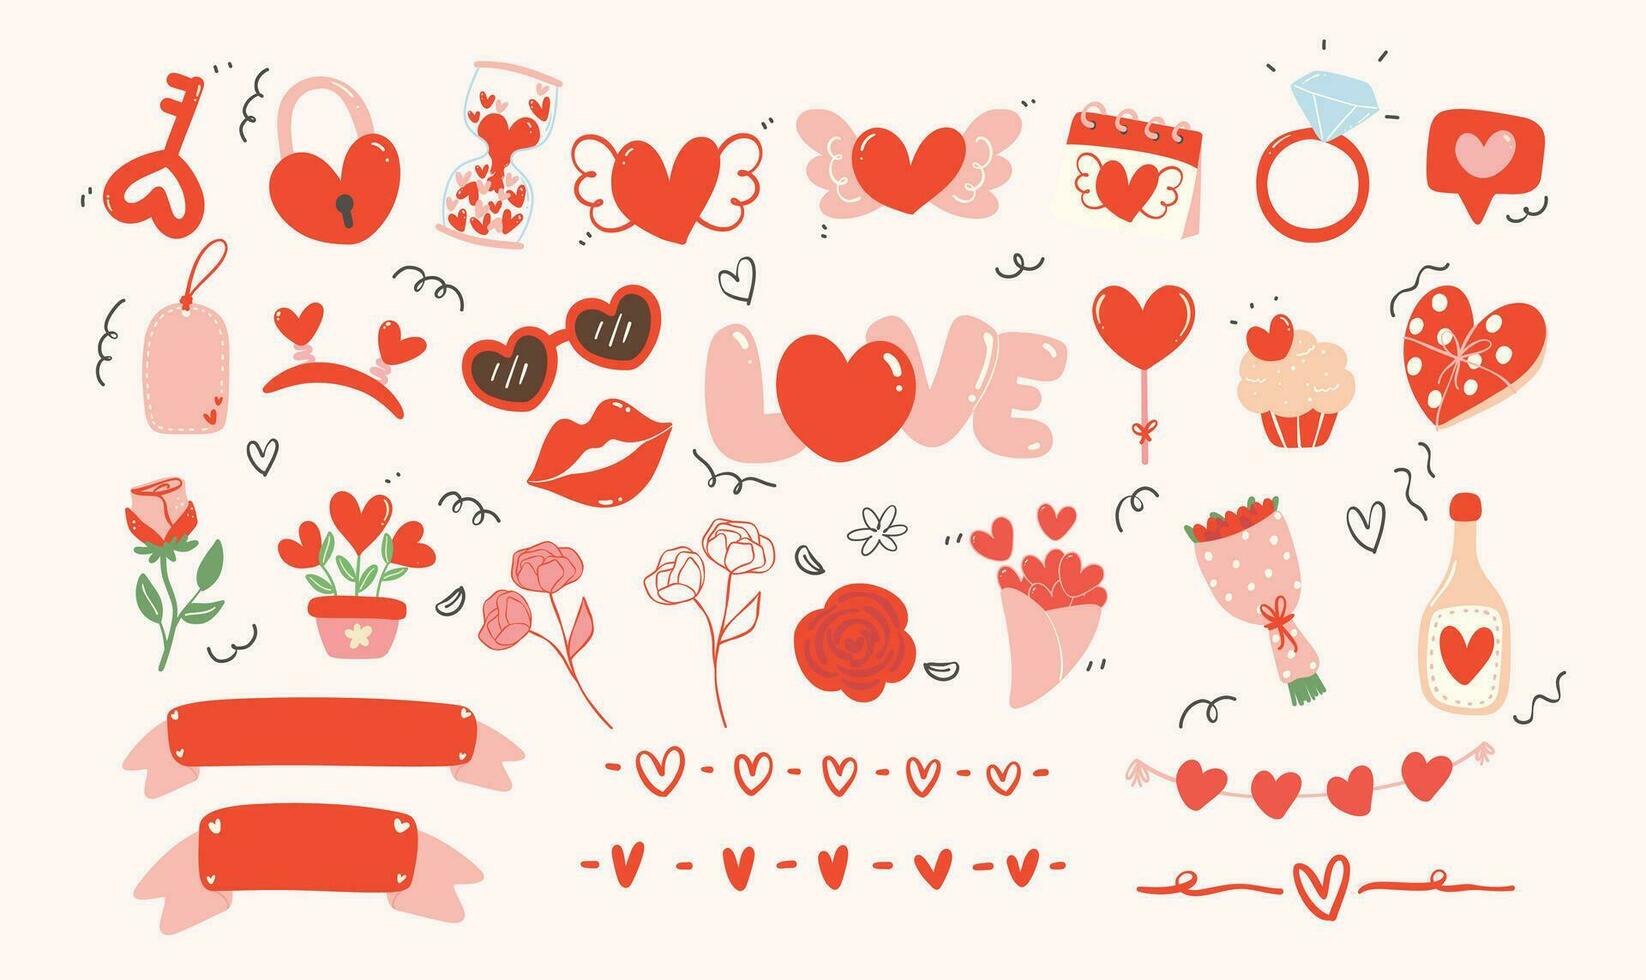 Cute Kawaii Valentine Element. Hand Drawn Illustration in Red and Pink Theme Featuring Adorable Hearts and Decorative Elements vector